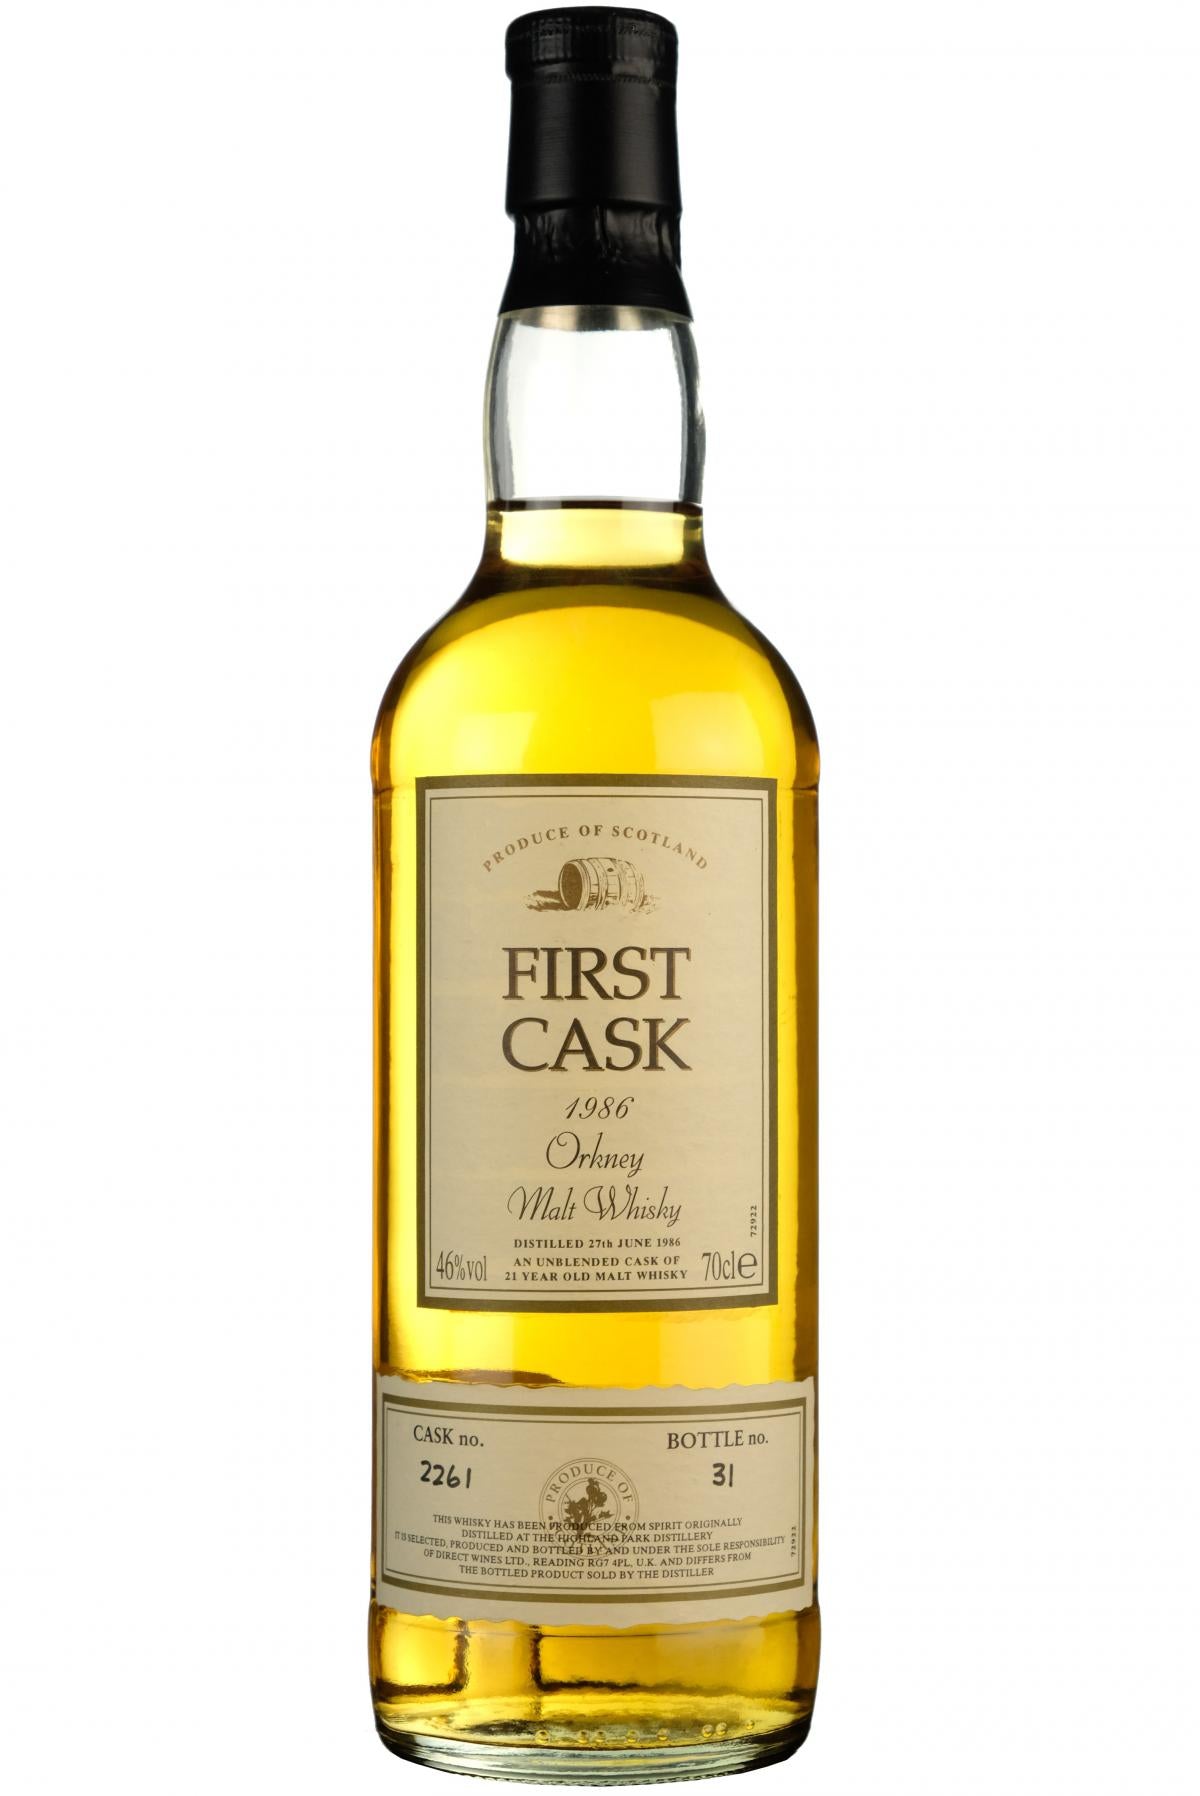 Highland Park 1986 | 21 Year Old | First Cask 2261